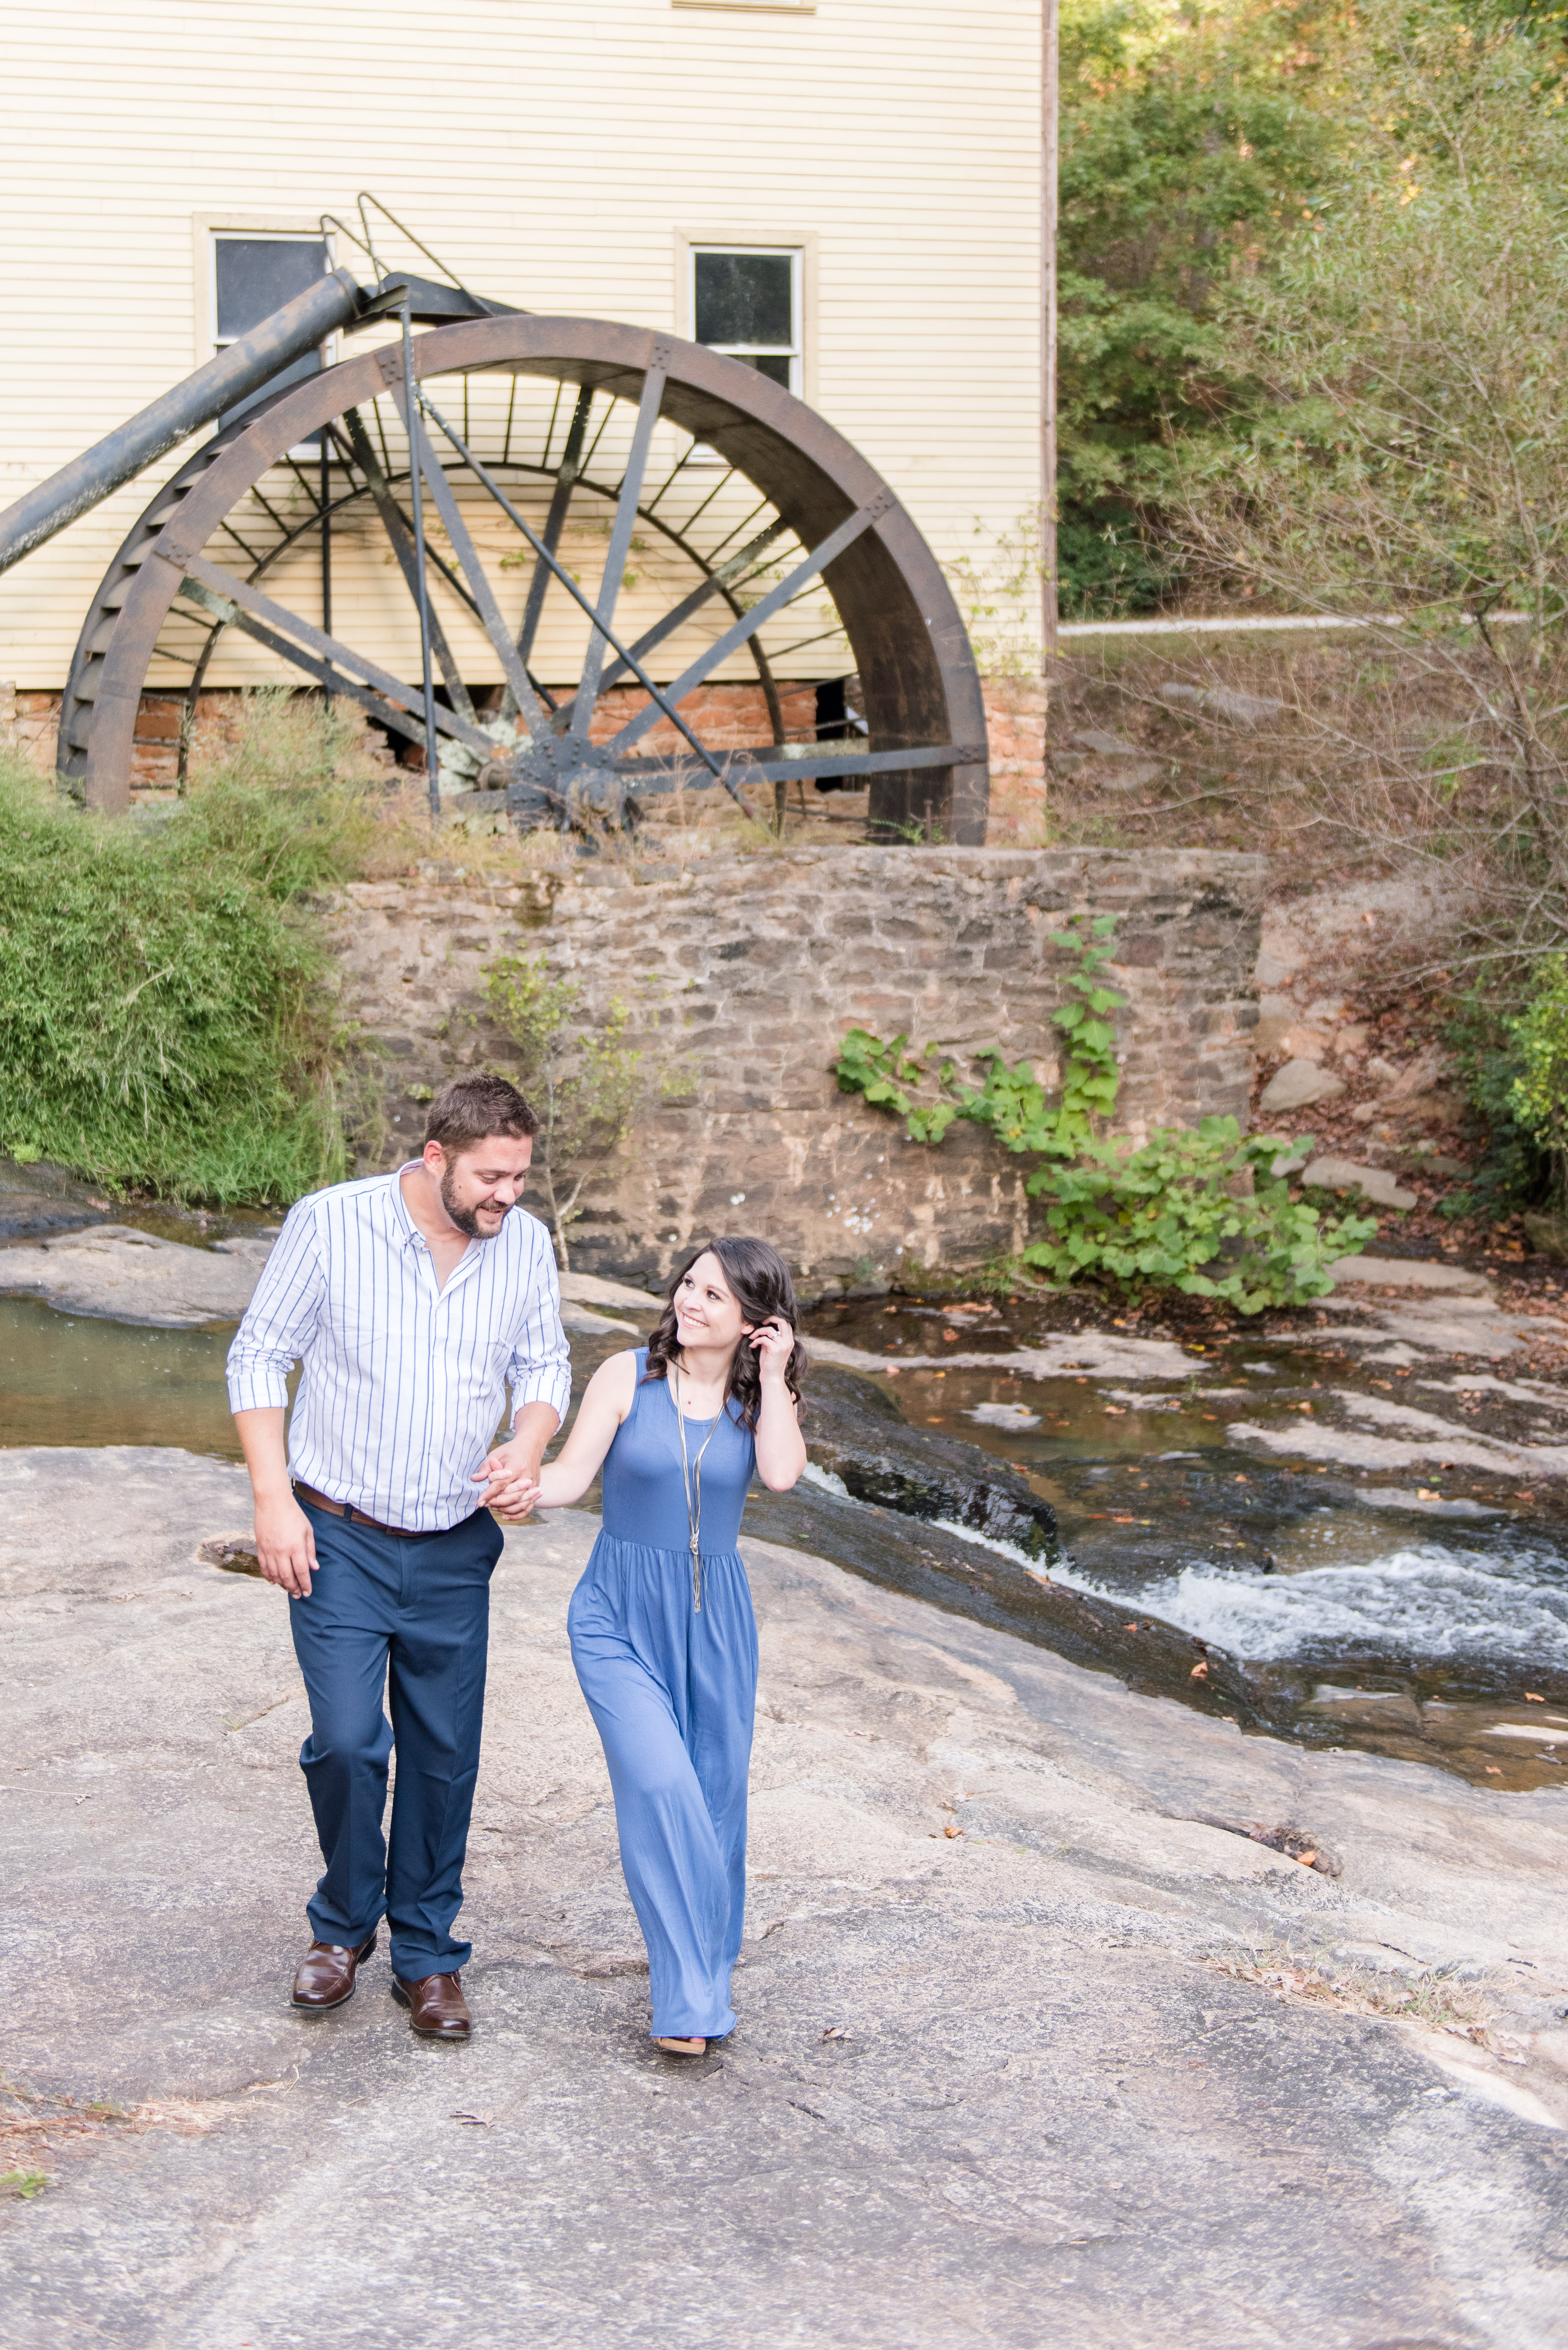 Capturing Bliss Photography Brittany + Matthew Engagement Session at Sells Mill Park